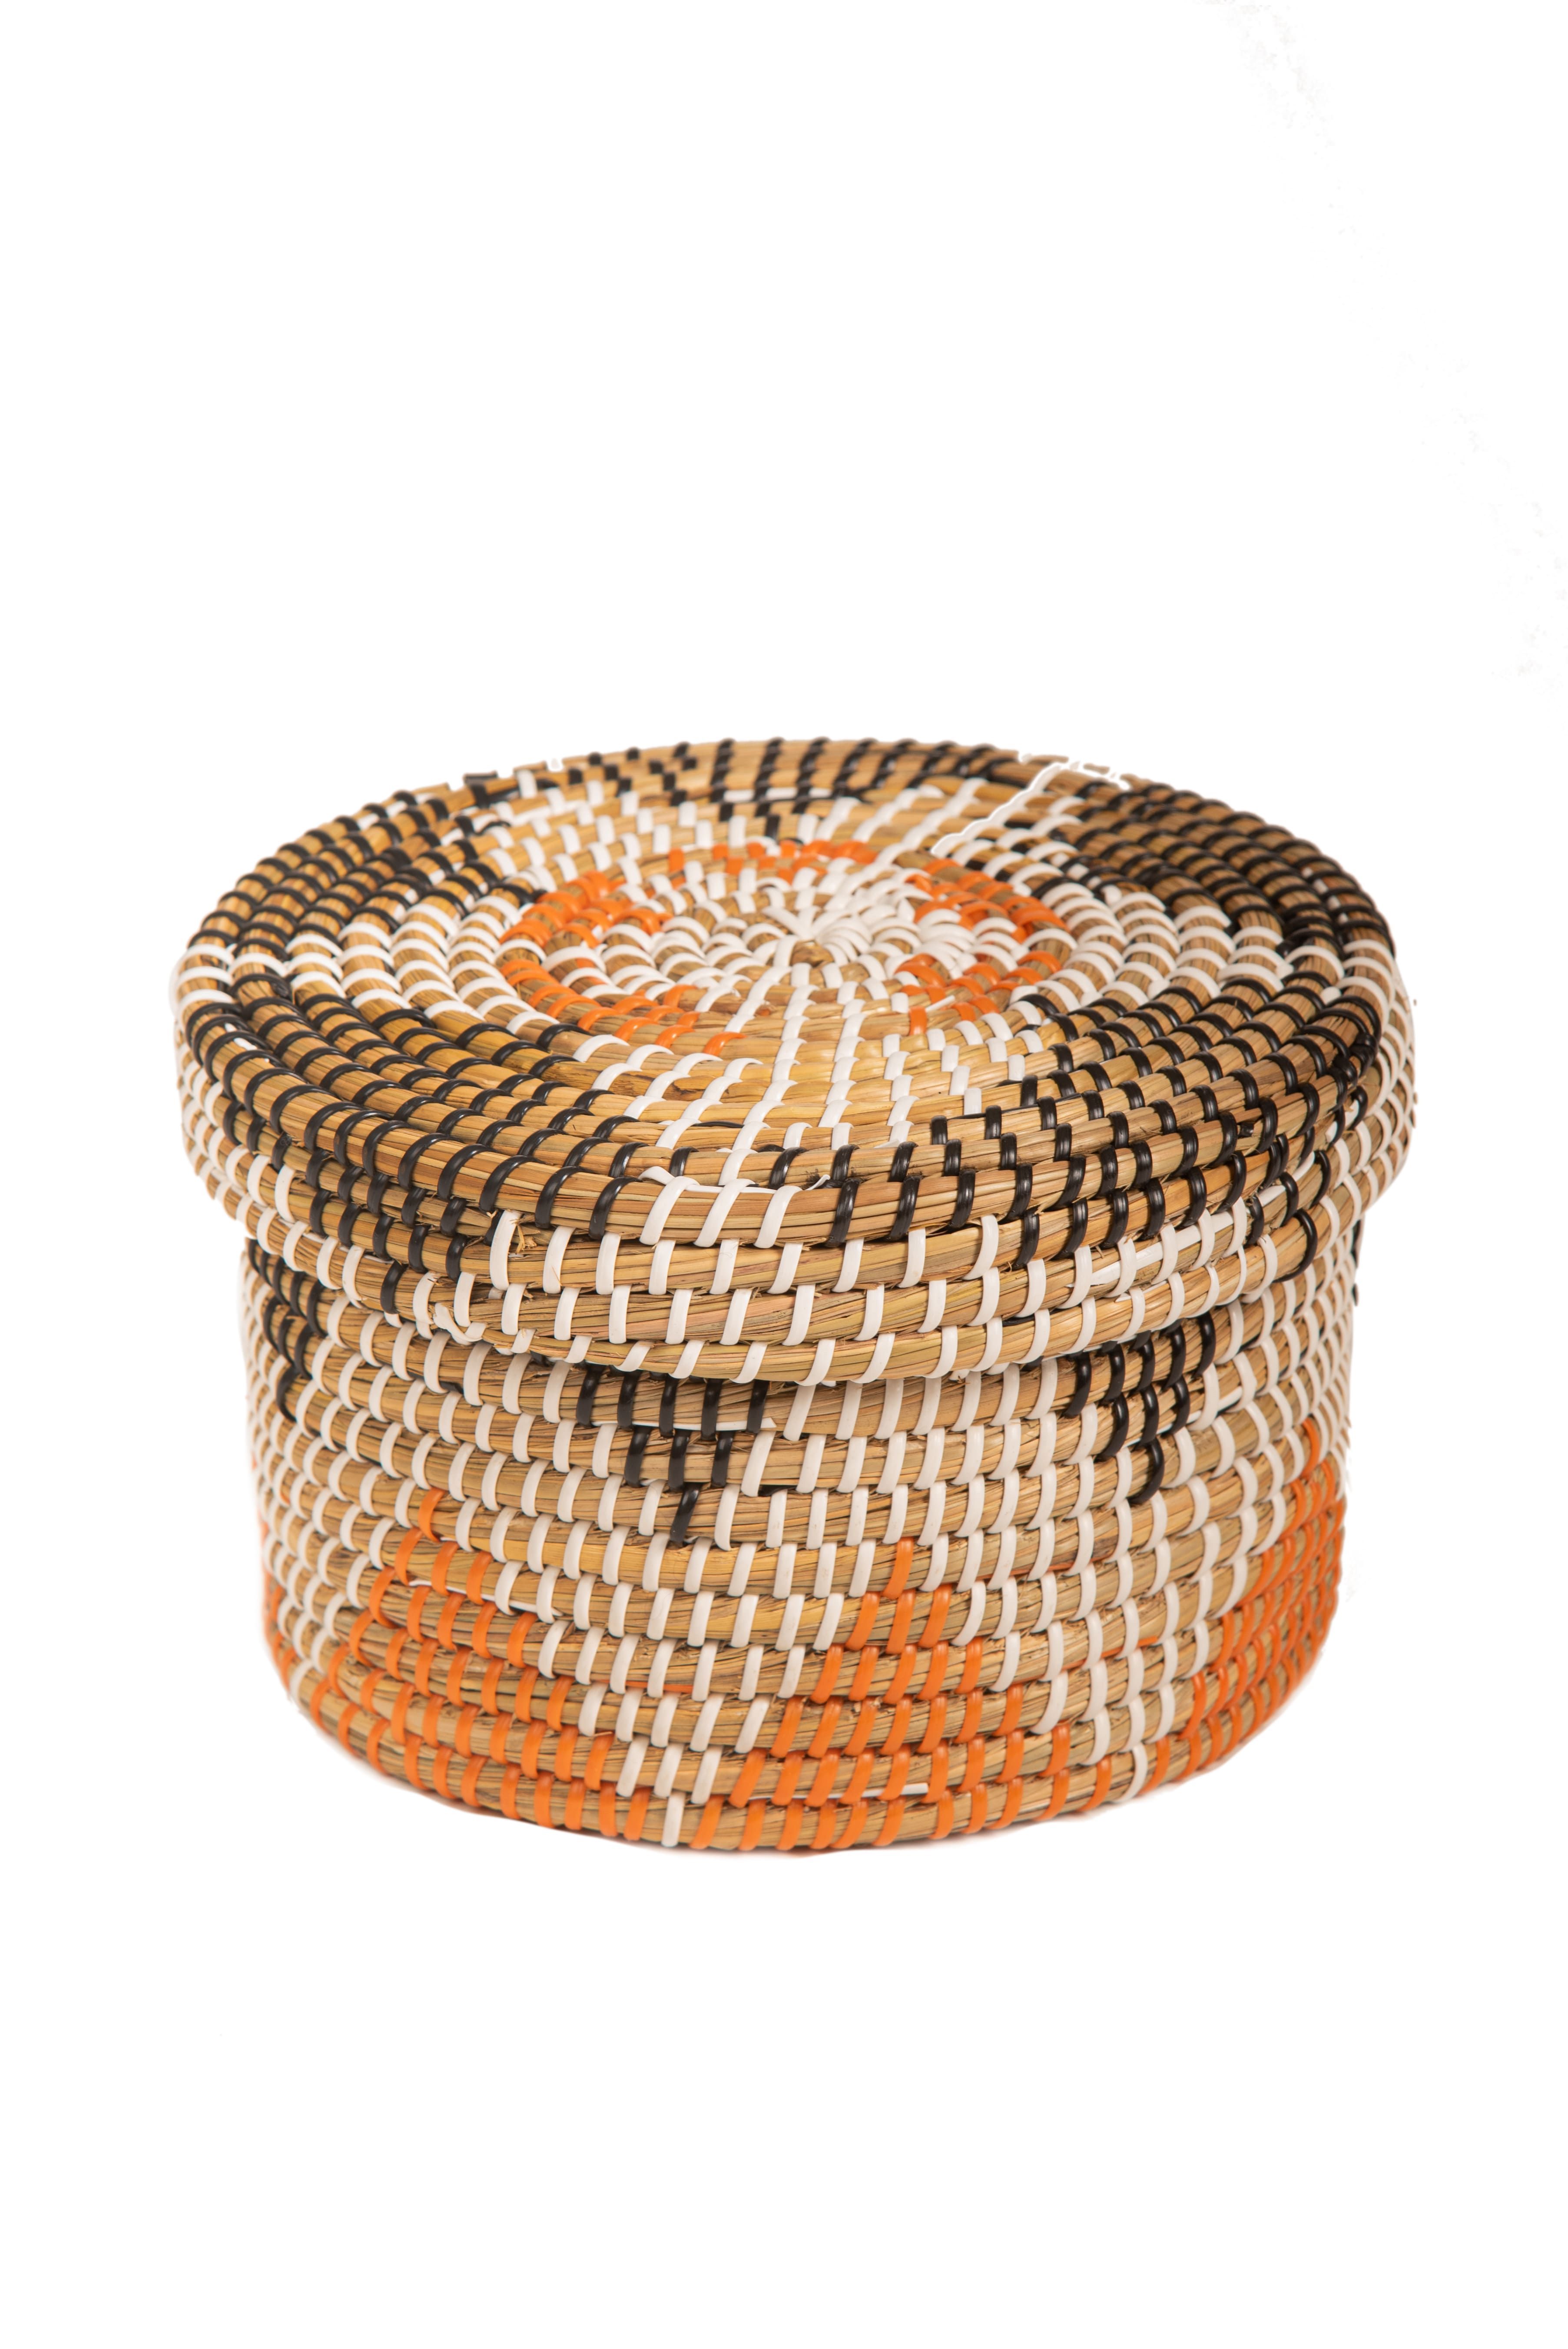 STRAW BASKET WITH LID BLACK-TERRACOTTA-WHITE D20X14